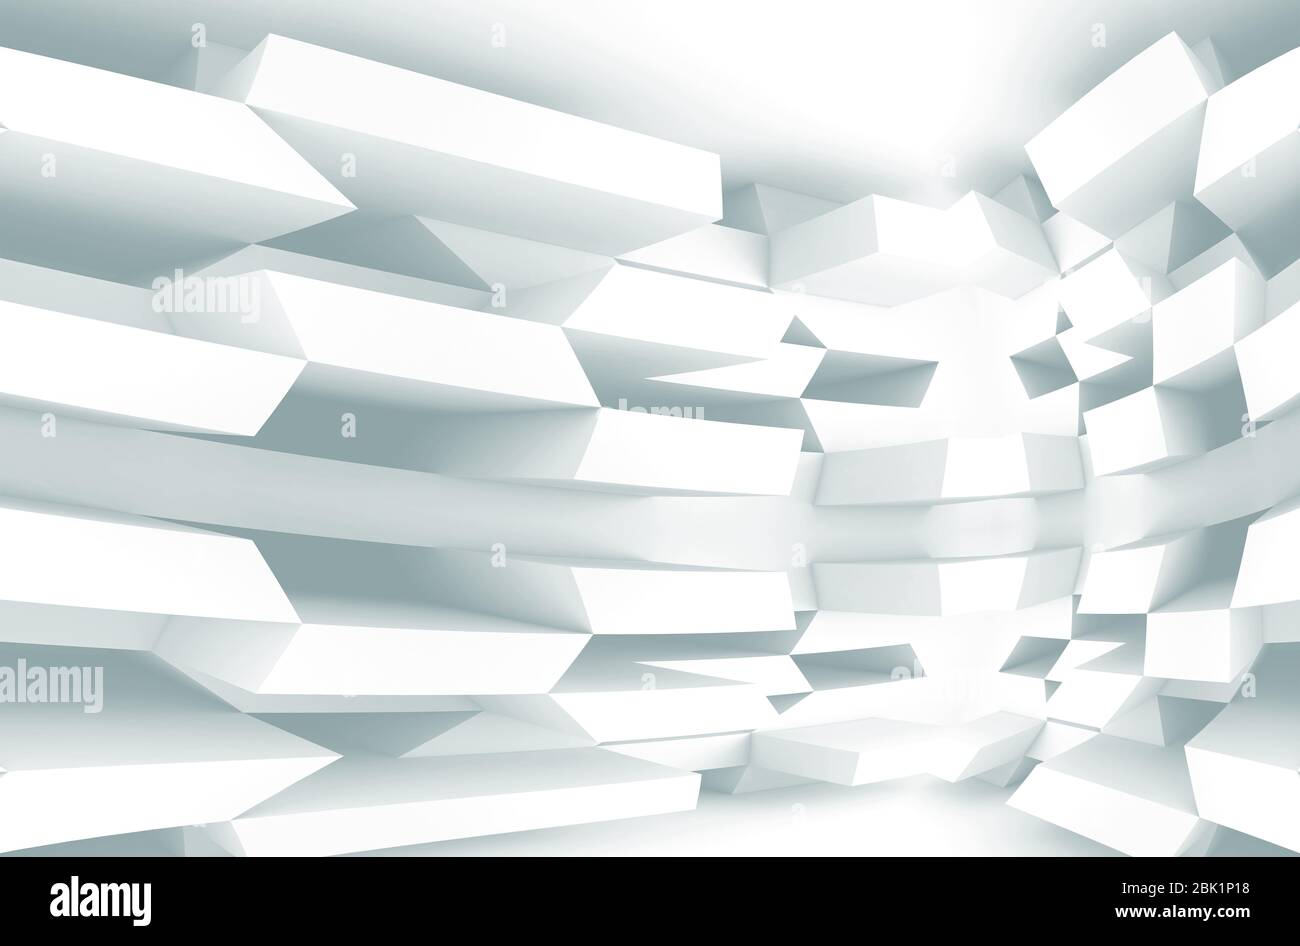 Abstract white geometric background, parametric wall installation, 3d rendering illustration Stock Photo